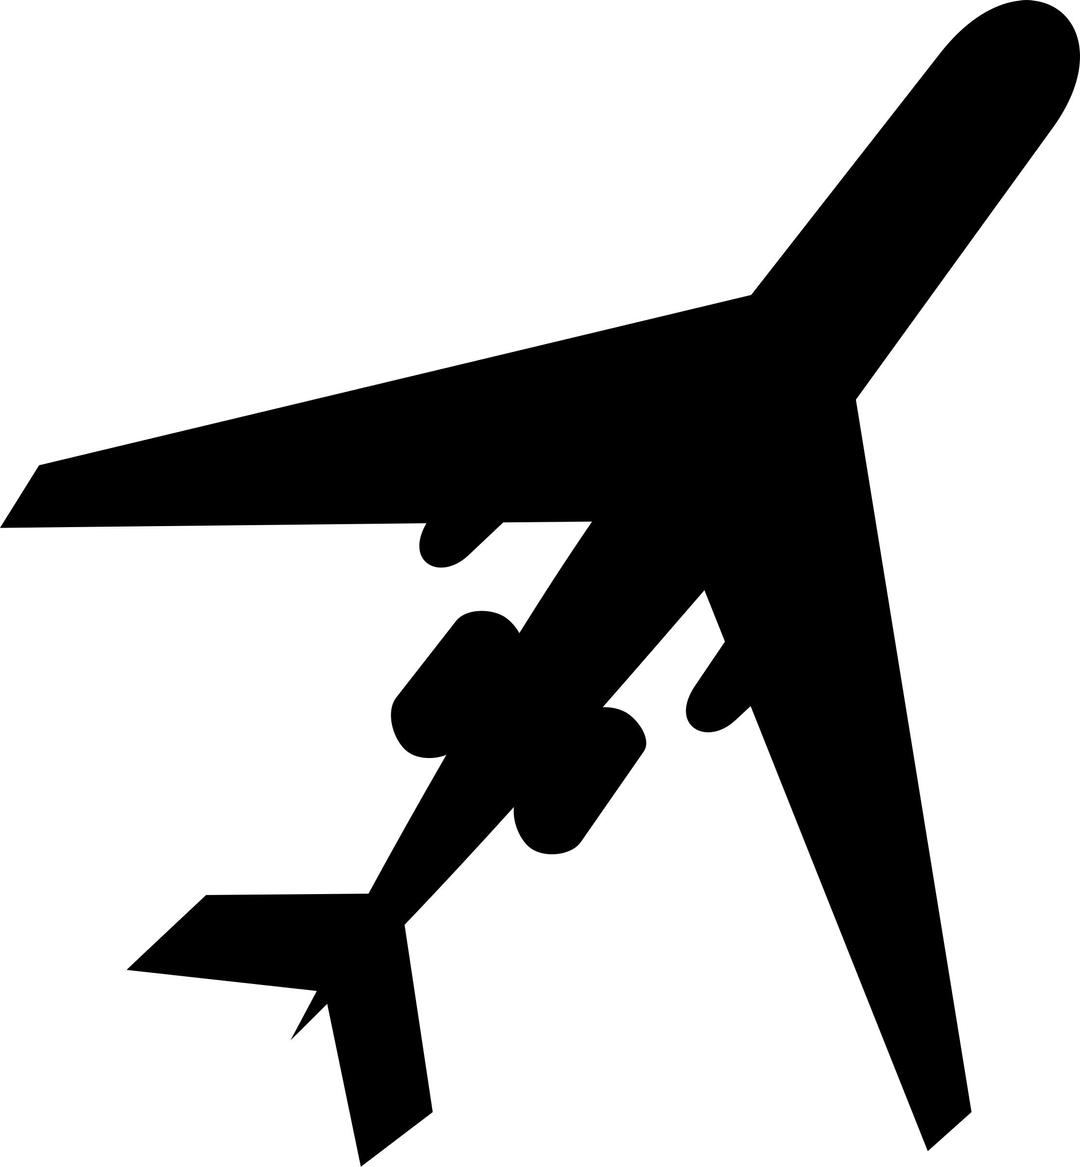 Airplane silhouette png transparent